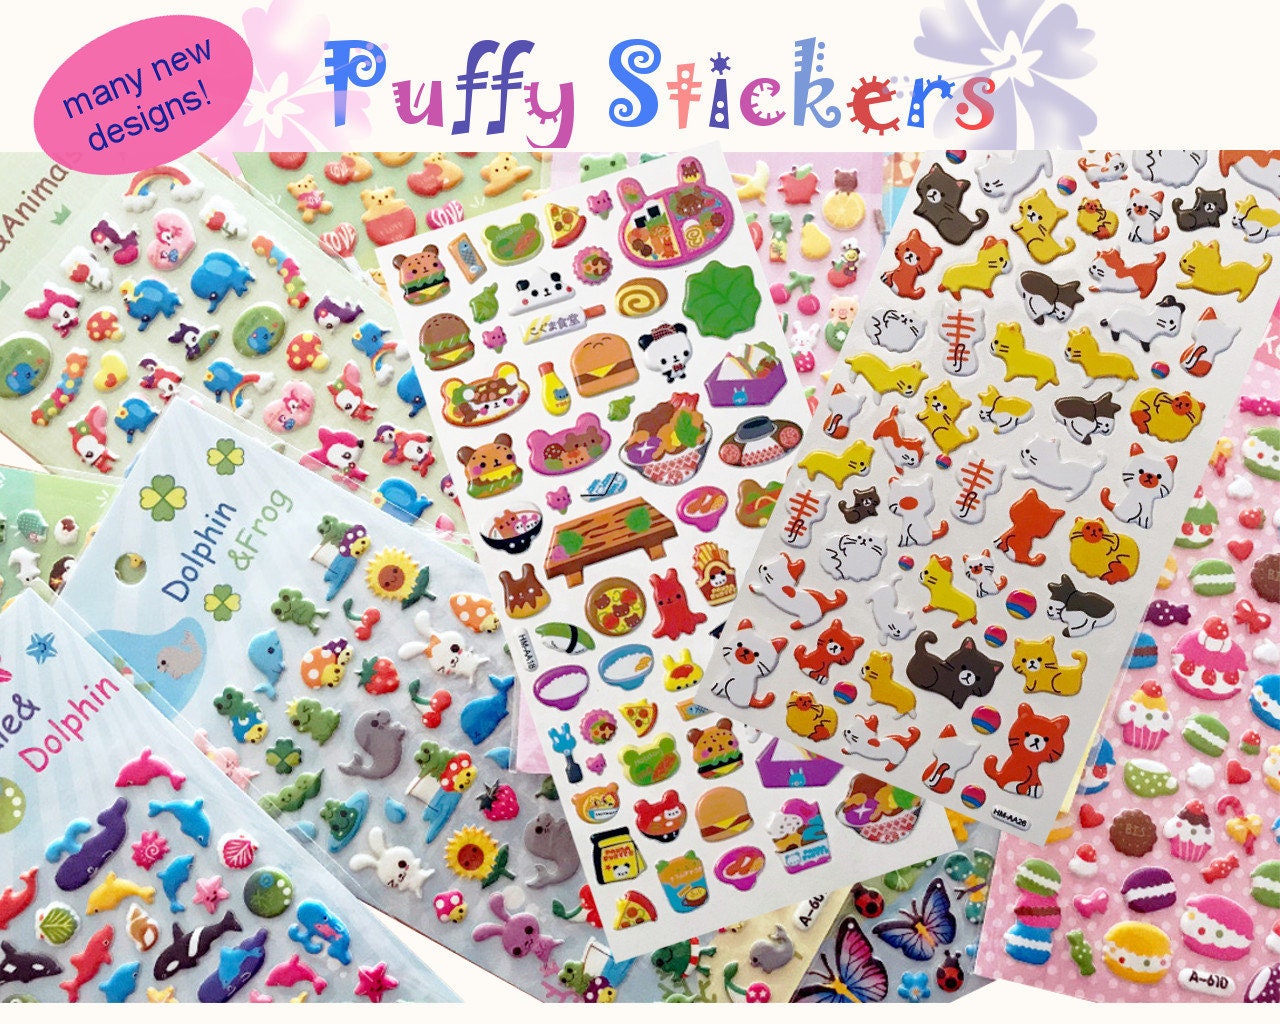 New Designs Puffy 3D Bubble Stickers for Scrapbooking DIY / Deco